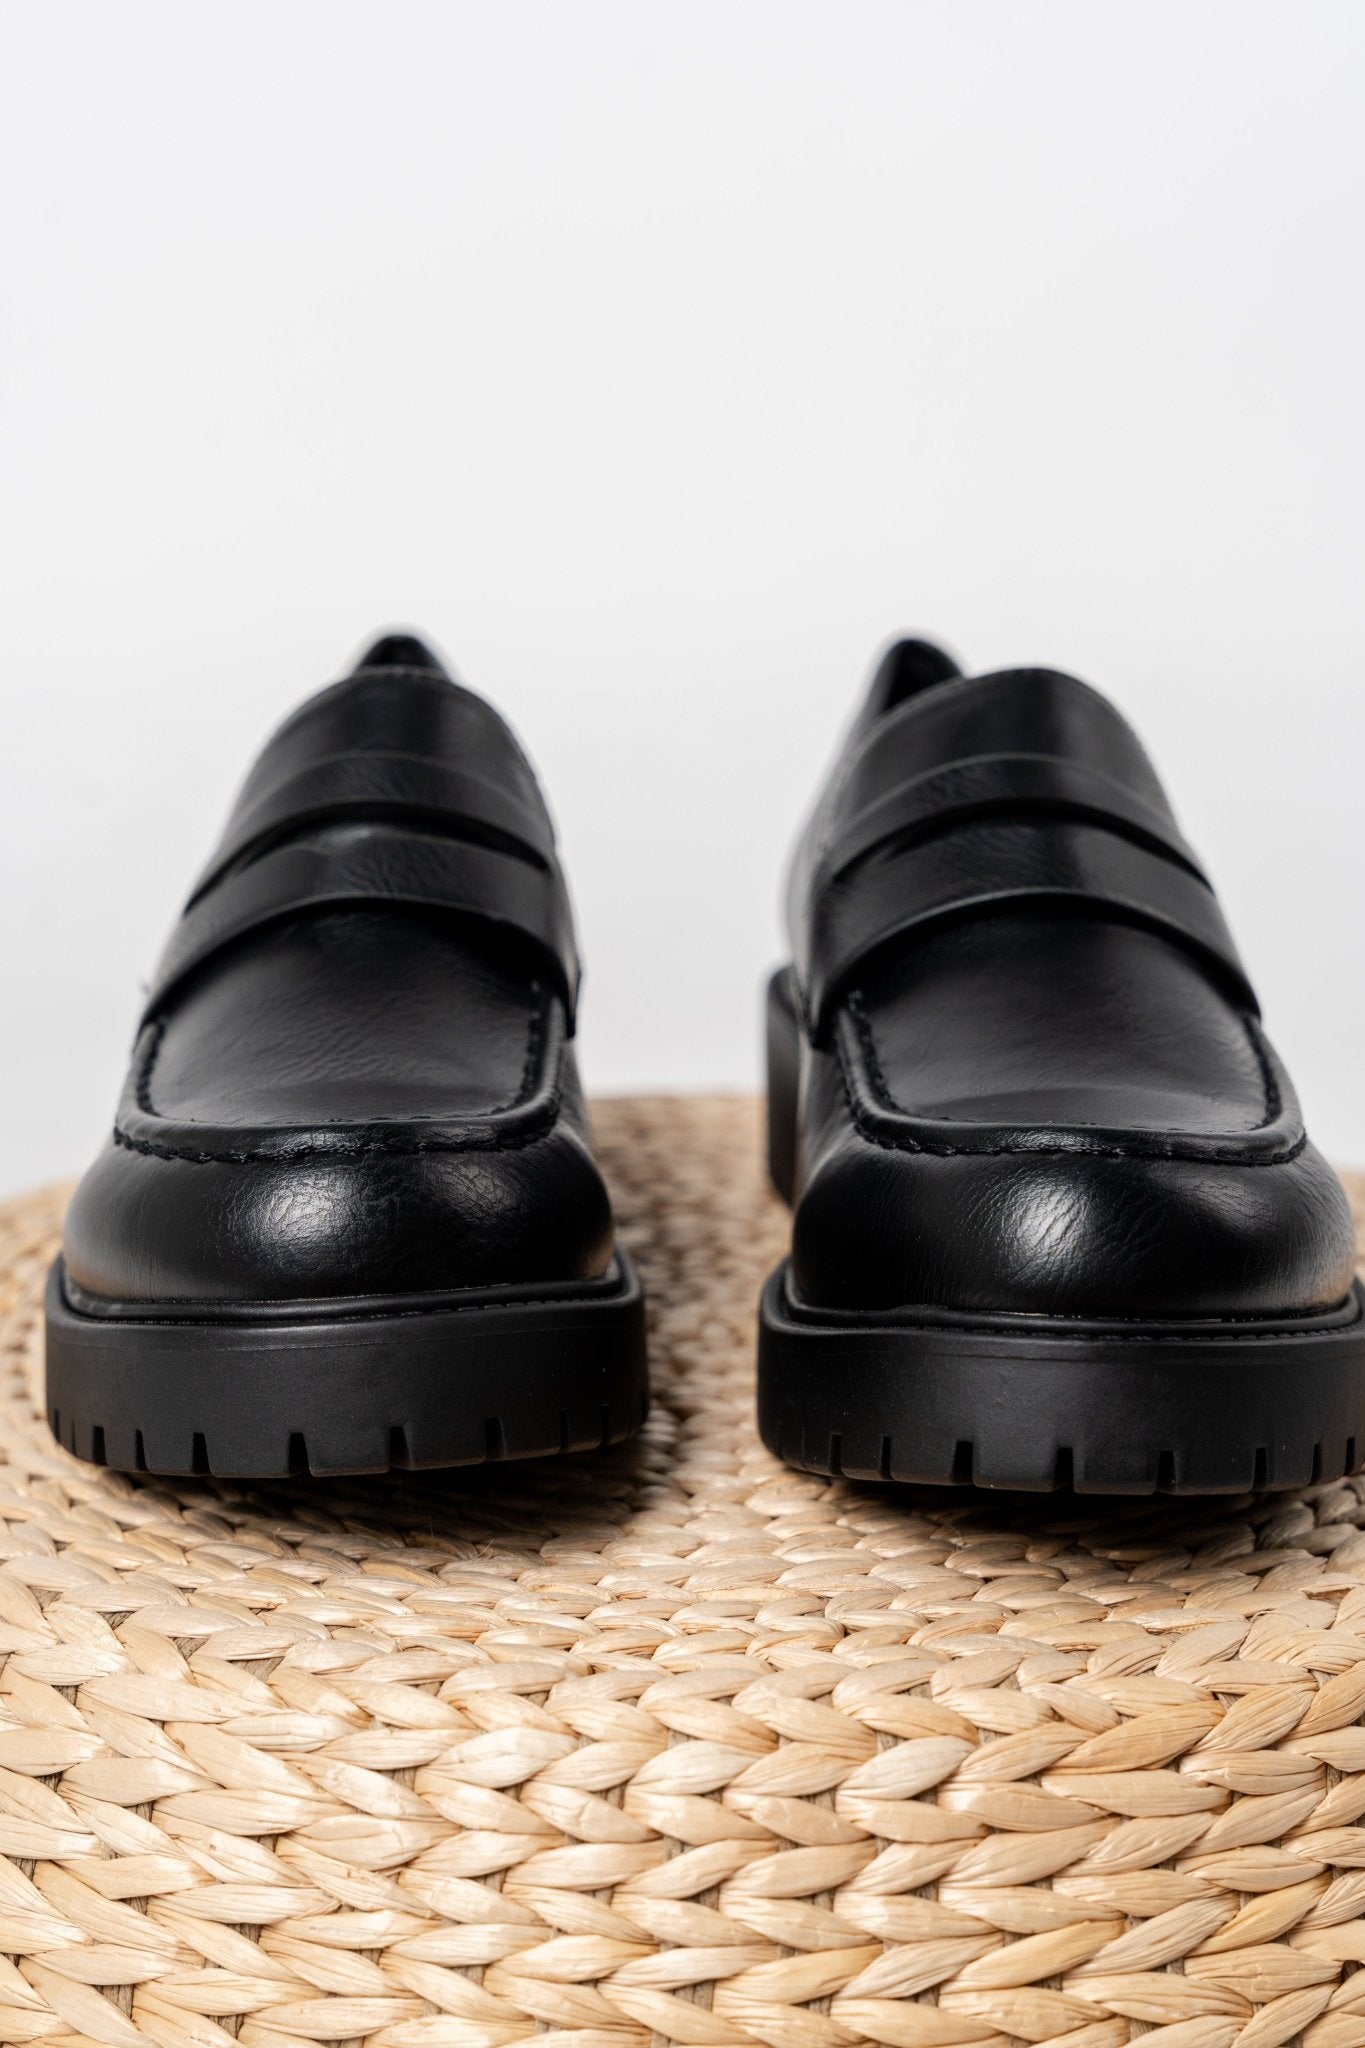 Hender chunky loafer black - Trendy shoes - Fashion Shoes at Lush Fashion Lounge Boutique in Oklahoma City